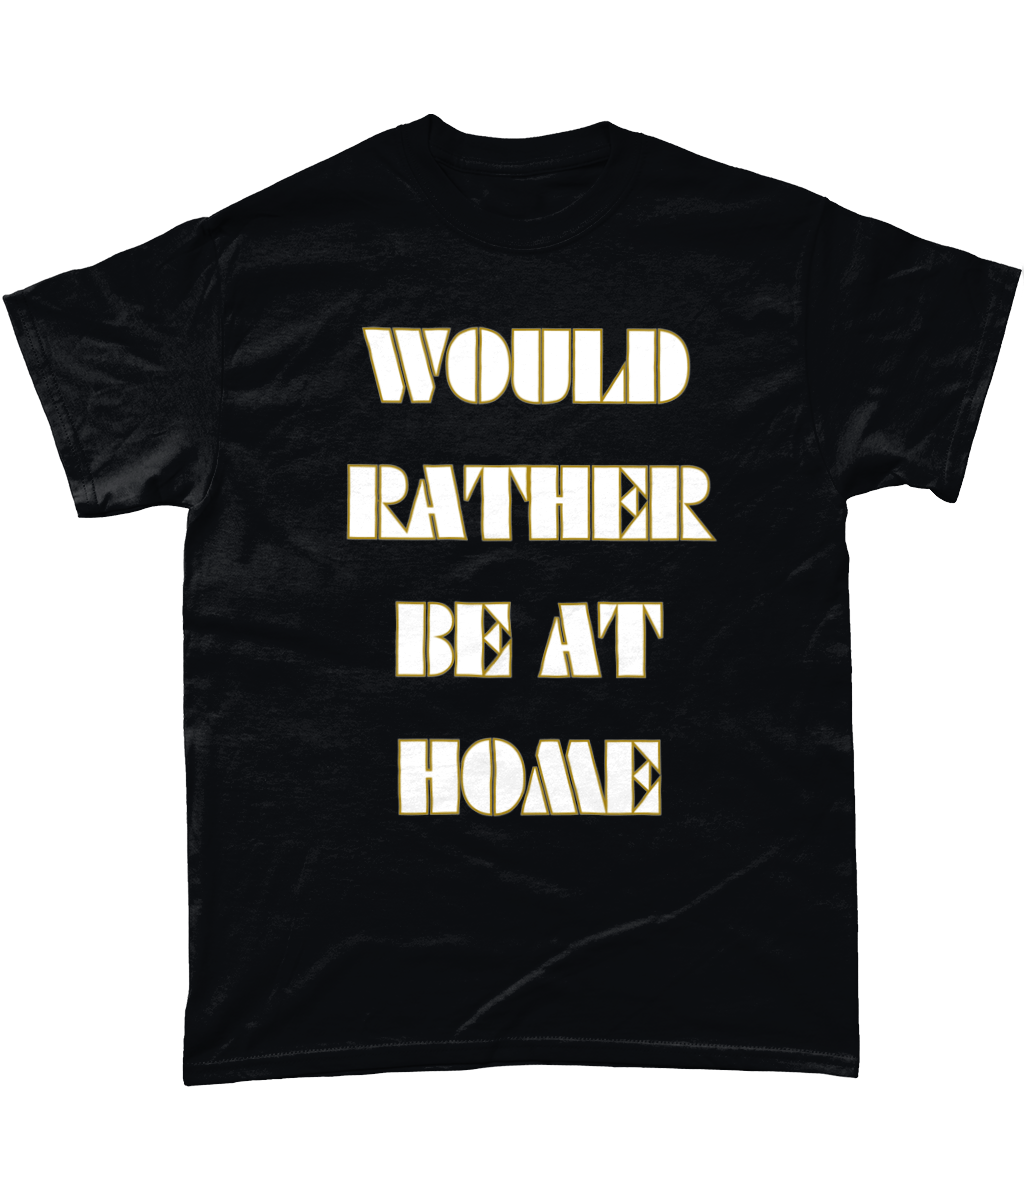 Would rather be at home t-shirt